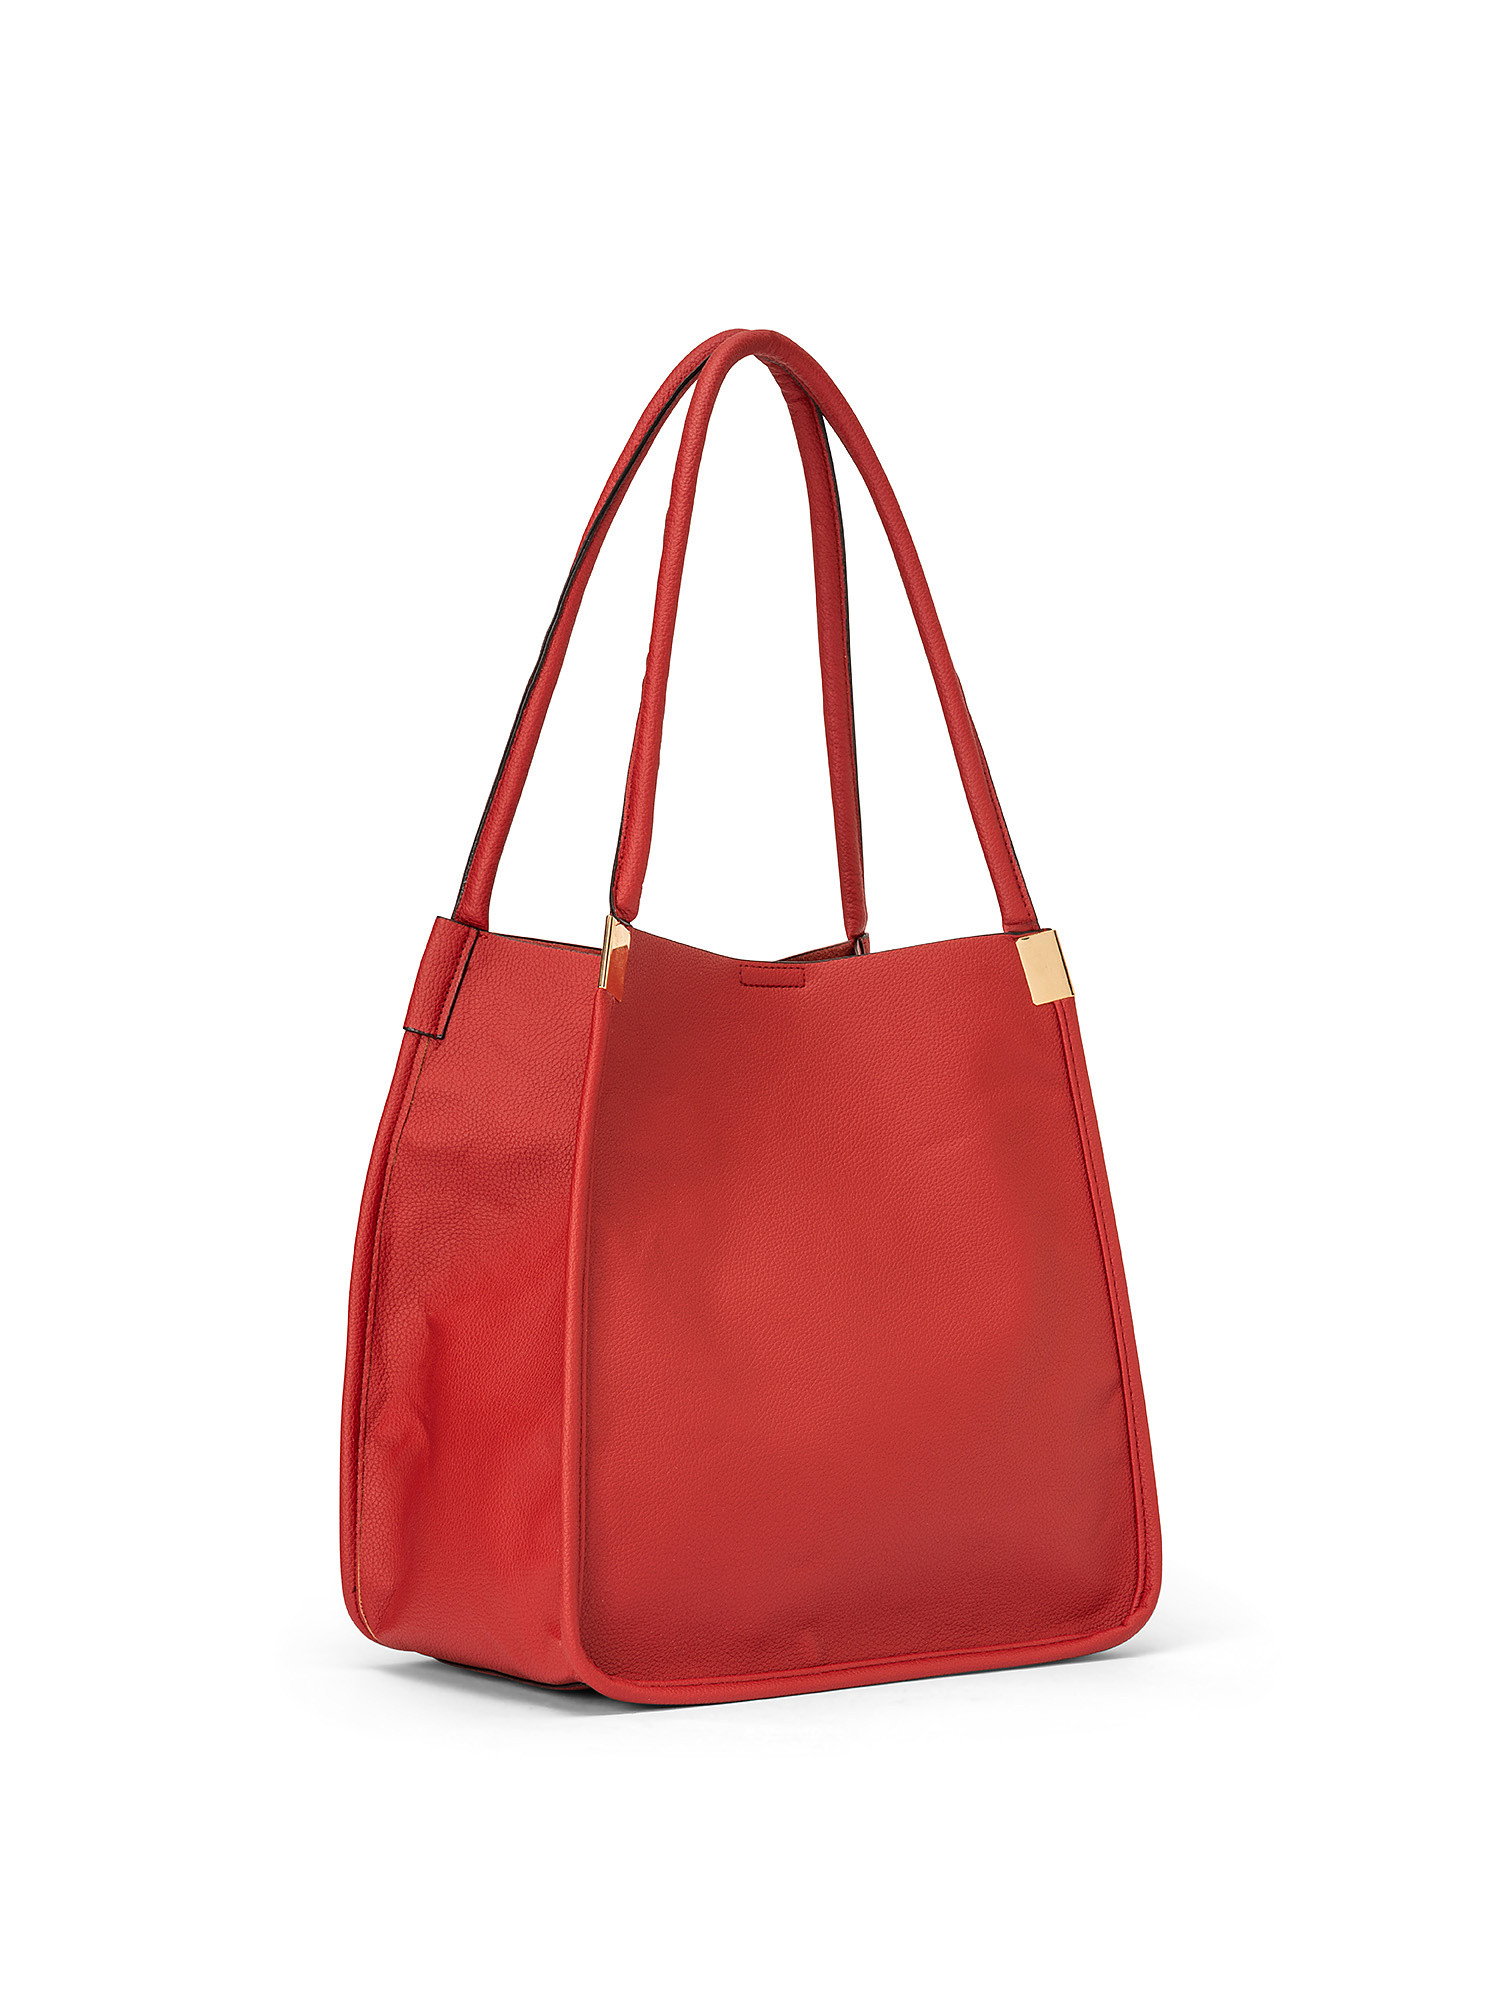 Shopping bag, Rosso, large image number 1